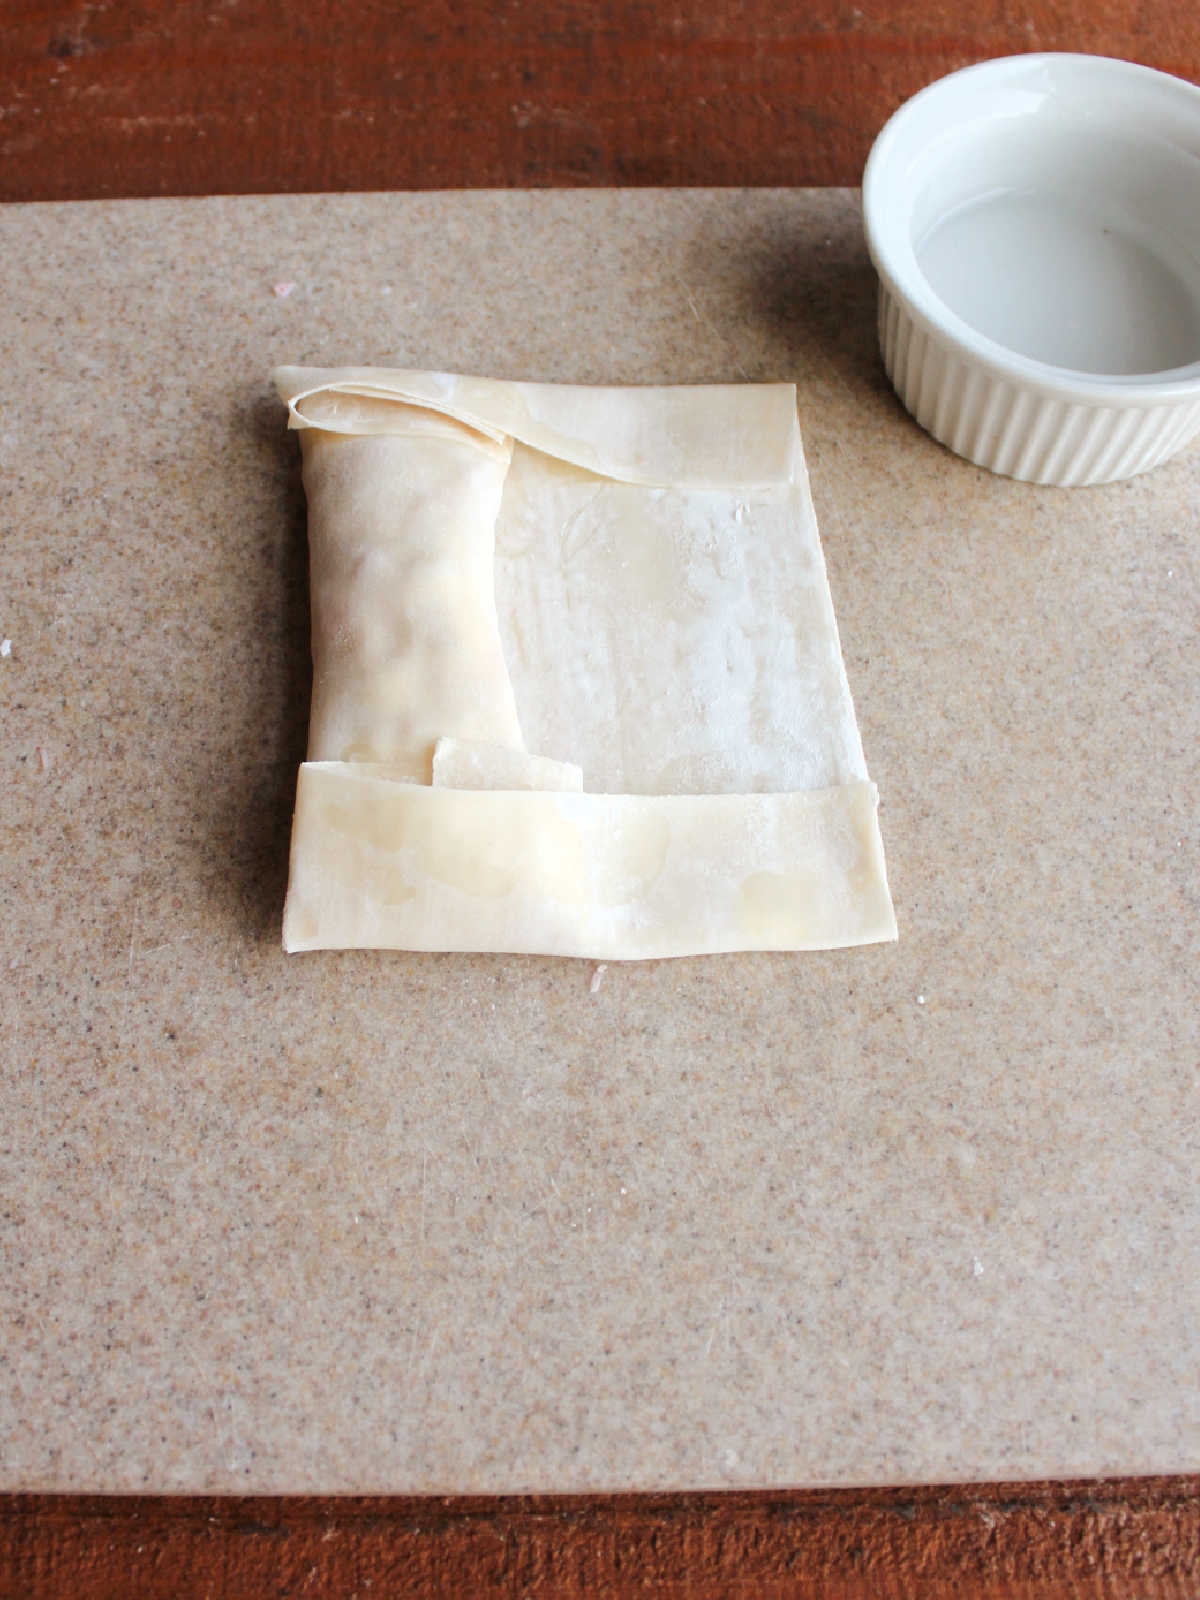 Folding the ends of the egg roll wrapper down around filling.